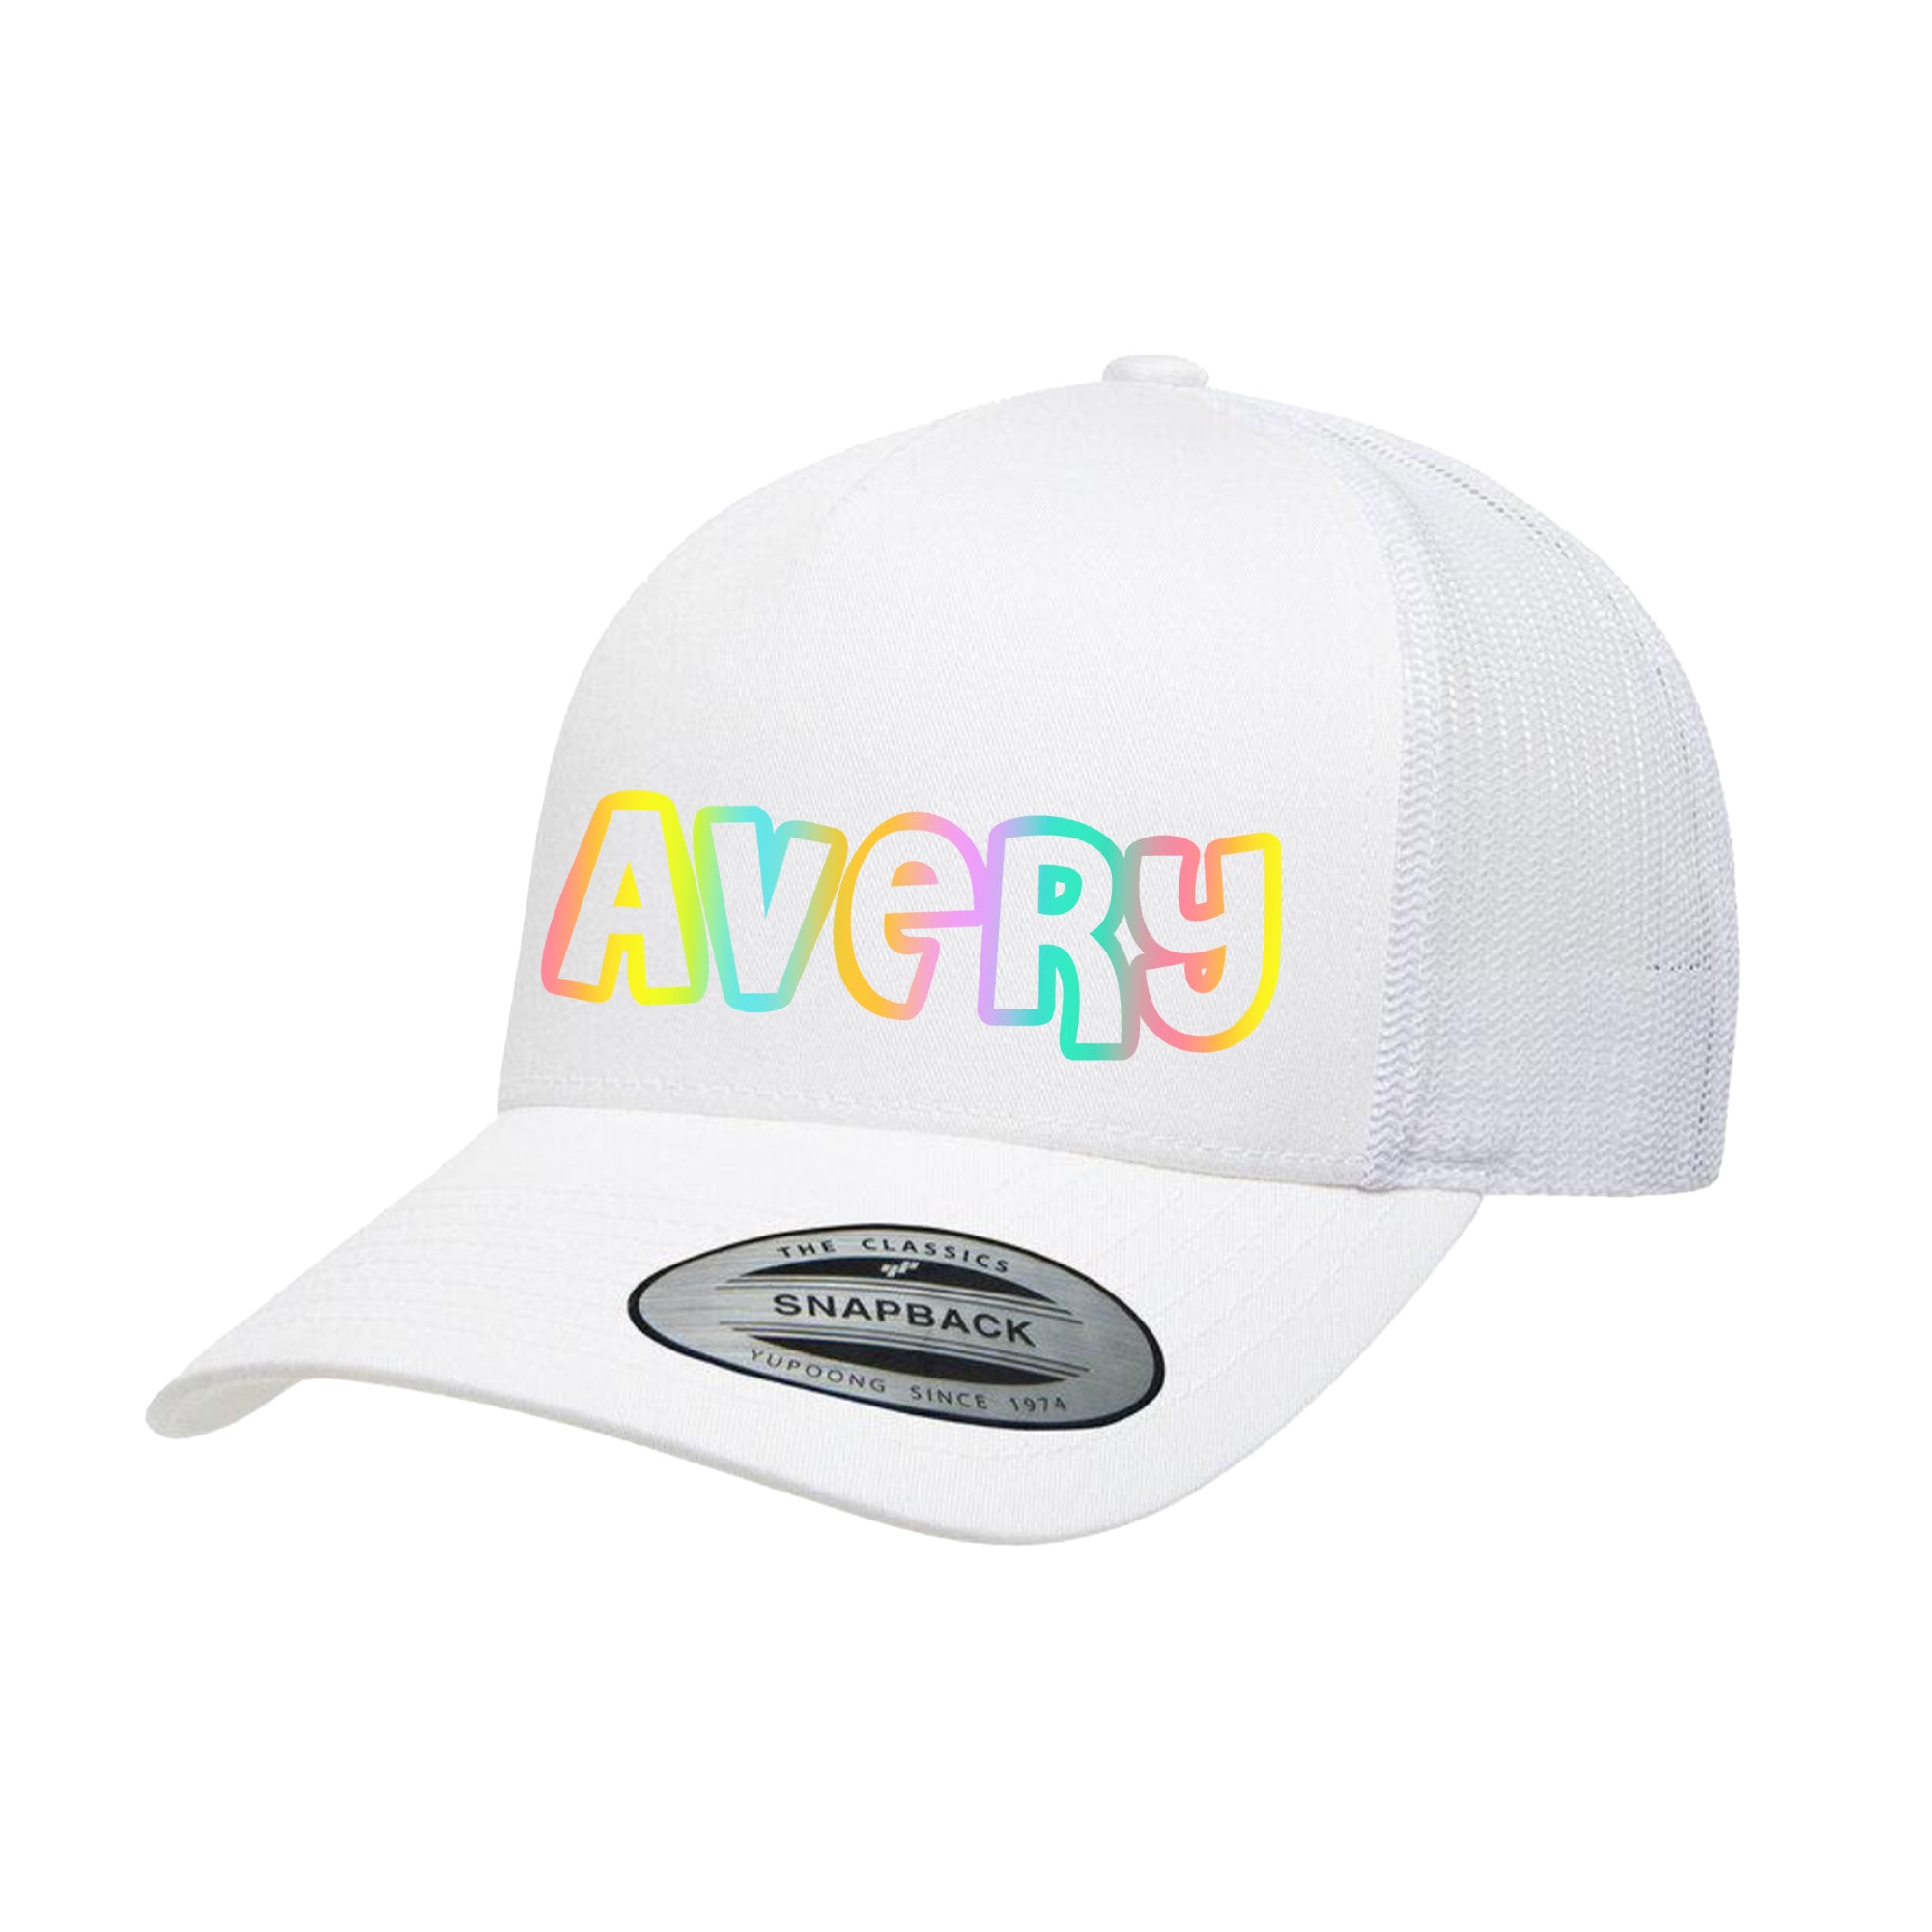 ADULT Personalized Hat - Outline Name